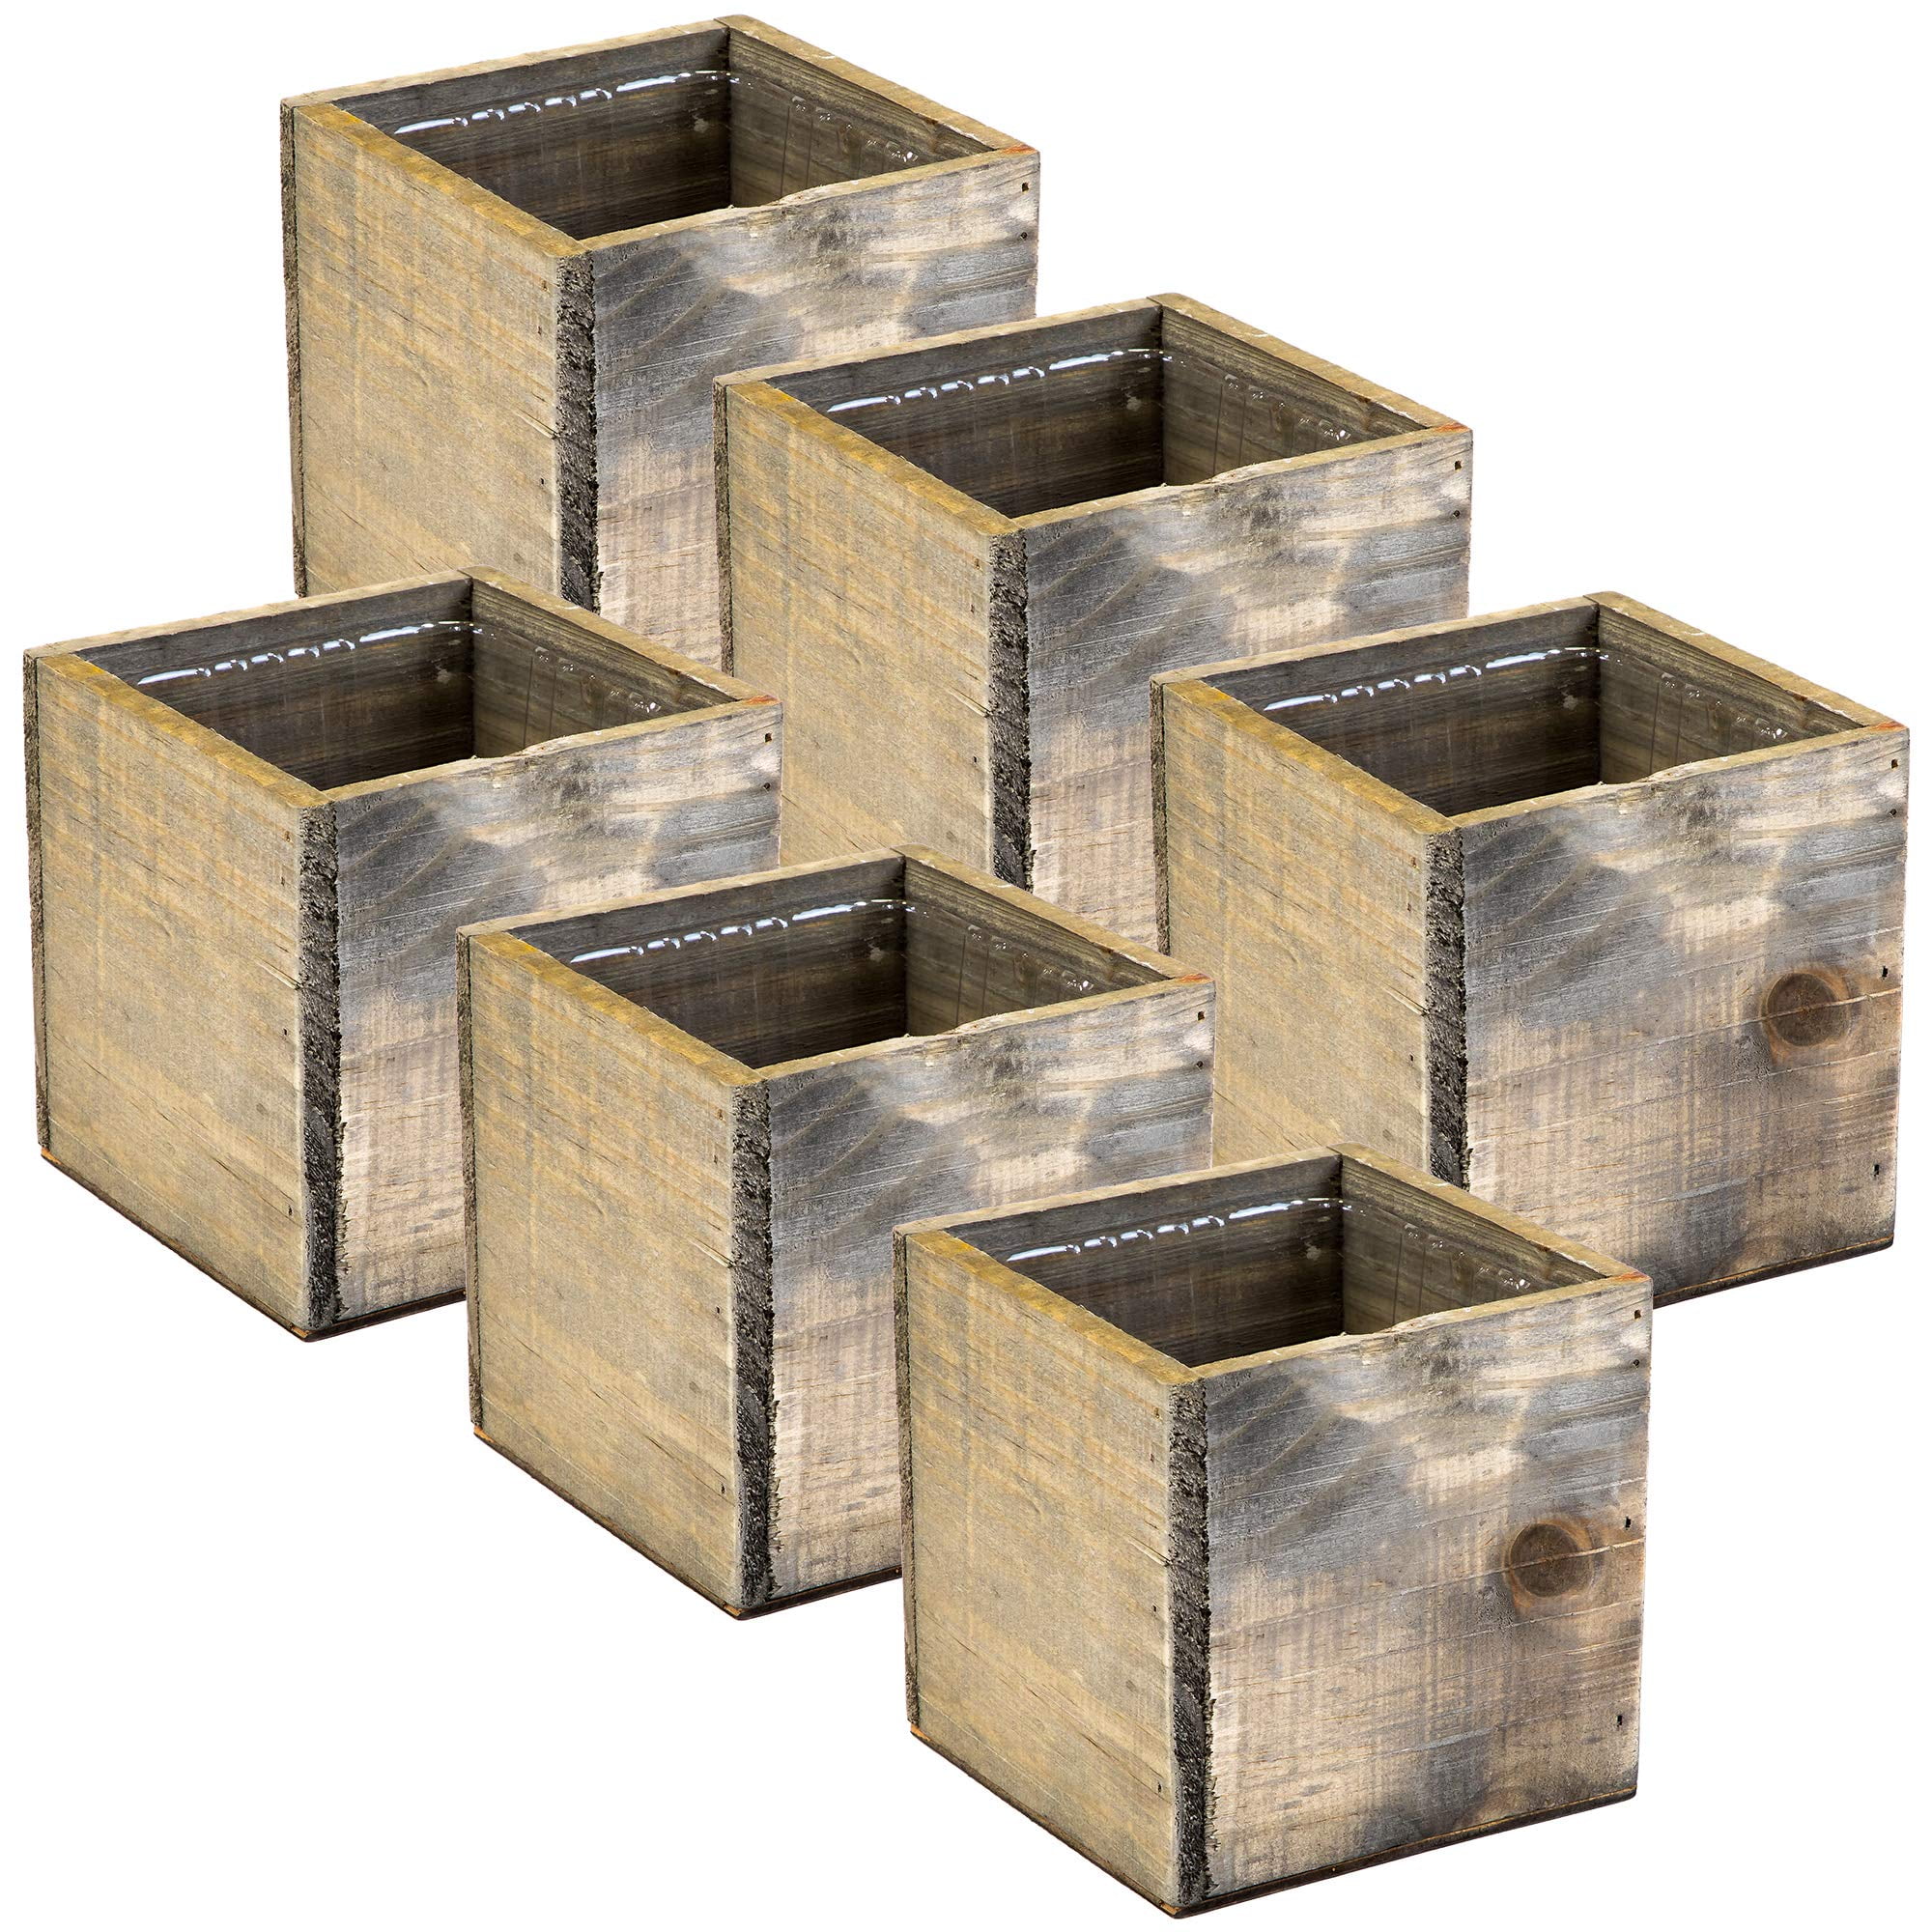 Details about   4 inches Natural Wood Rustic Square Planter Boxes Holders Centerpieces Wedding 